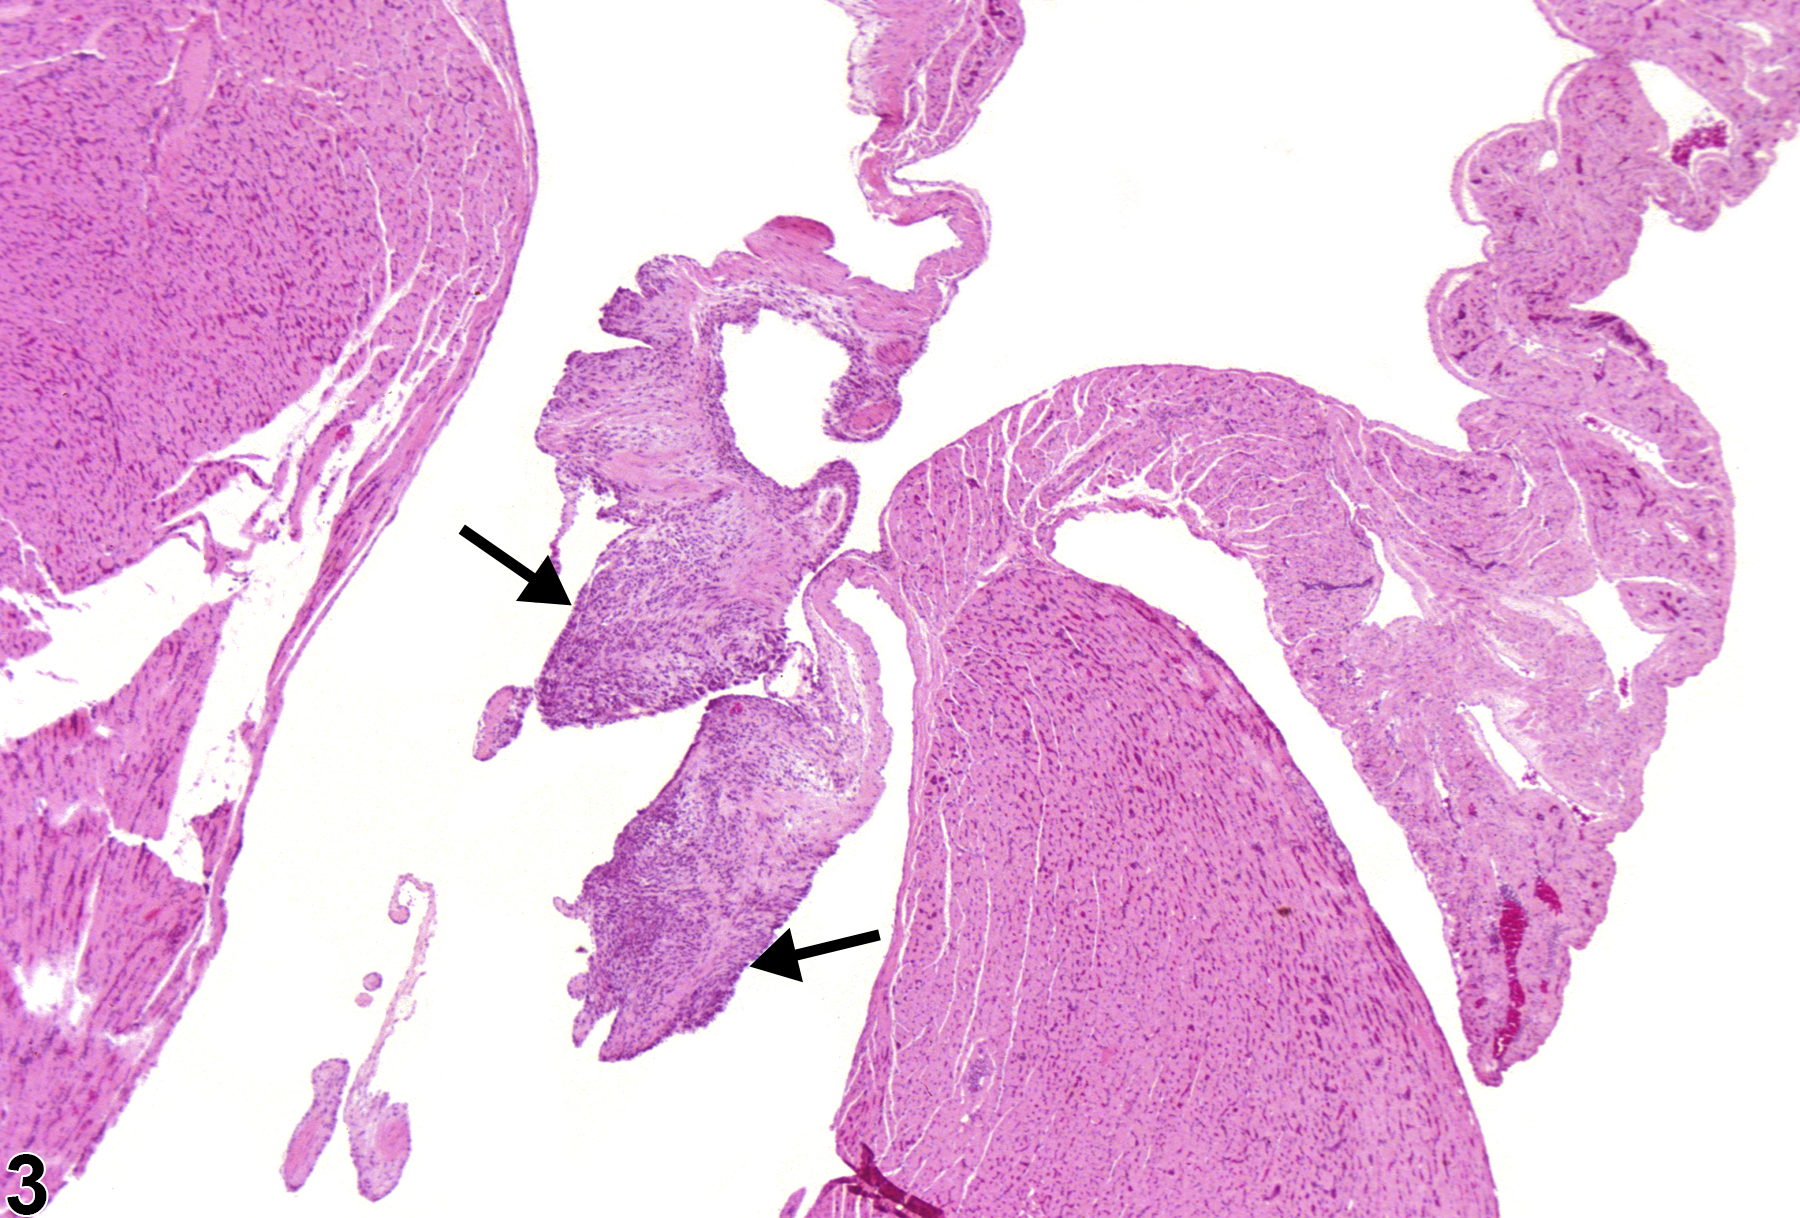 Image of inflammation in the heart from a female F344/N rat in a chronic study